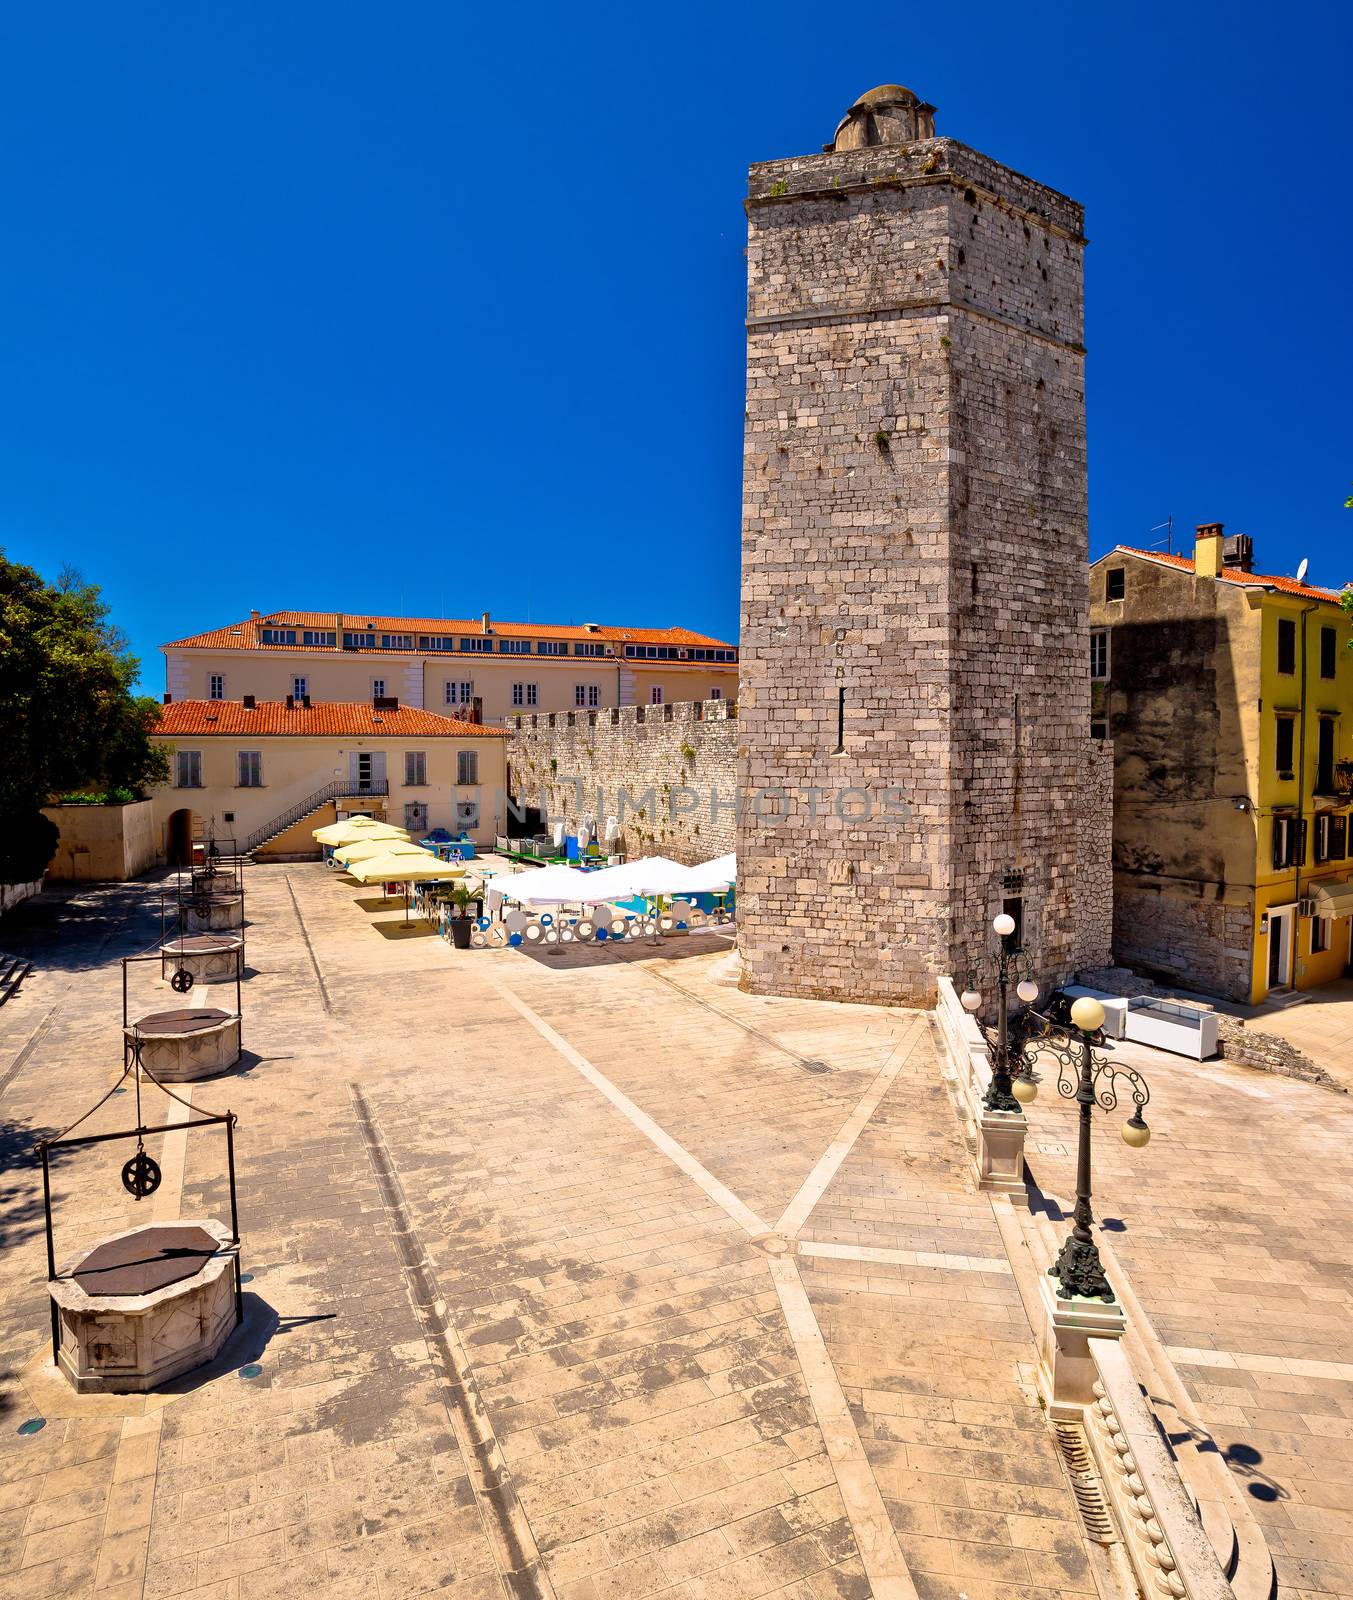 Zadar Five wells square and historic architecture view by xbrchx